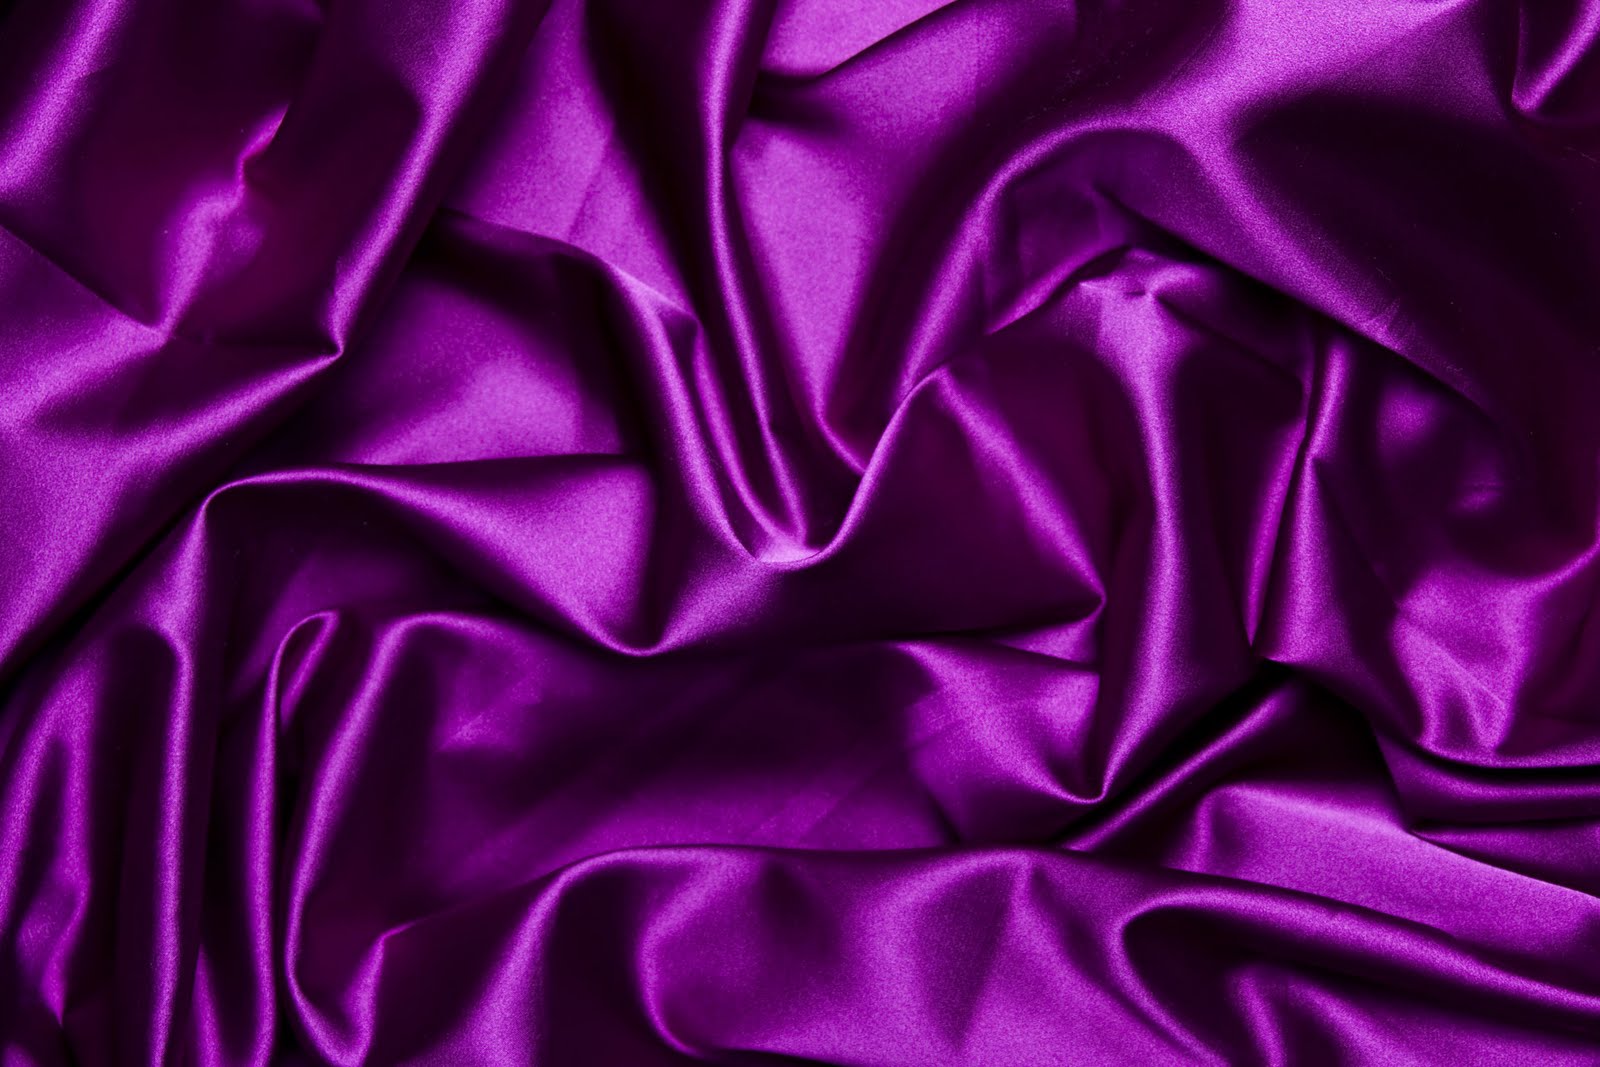 What Are the Different Uses of Silk fabrics